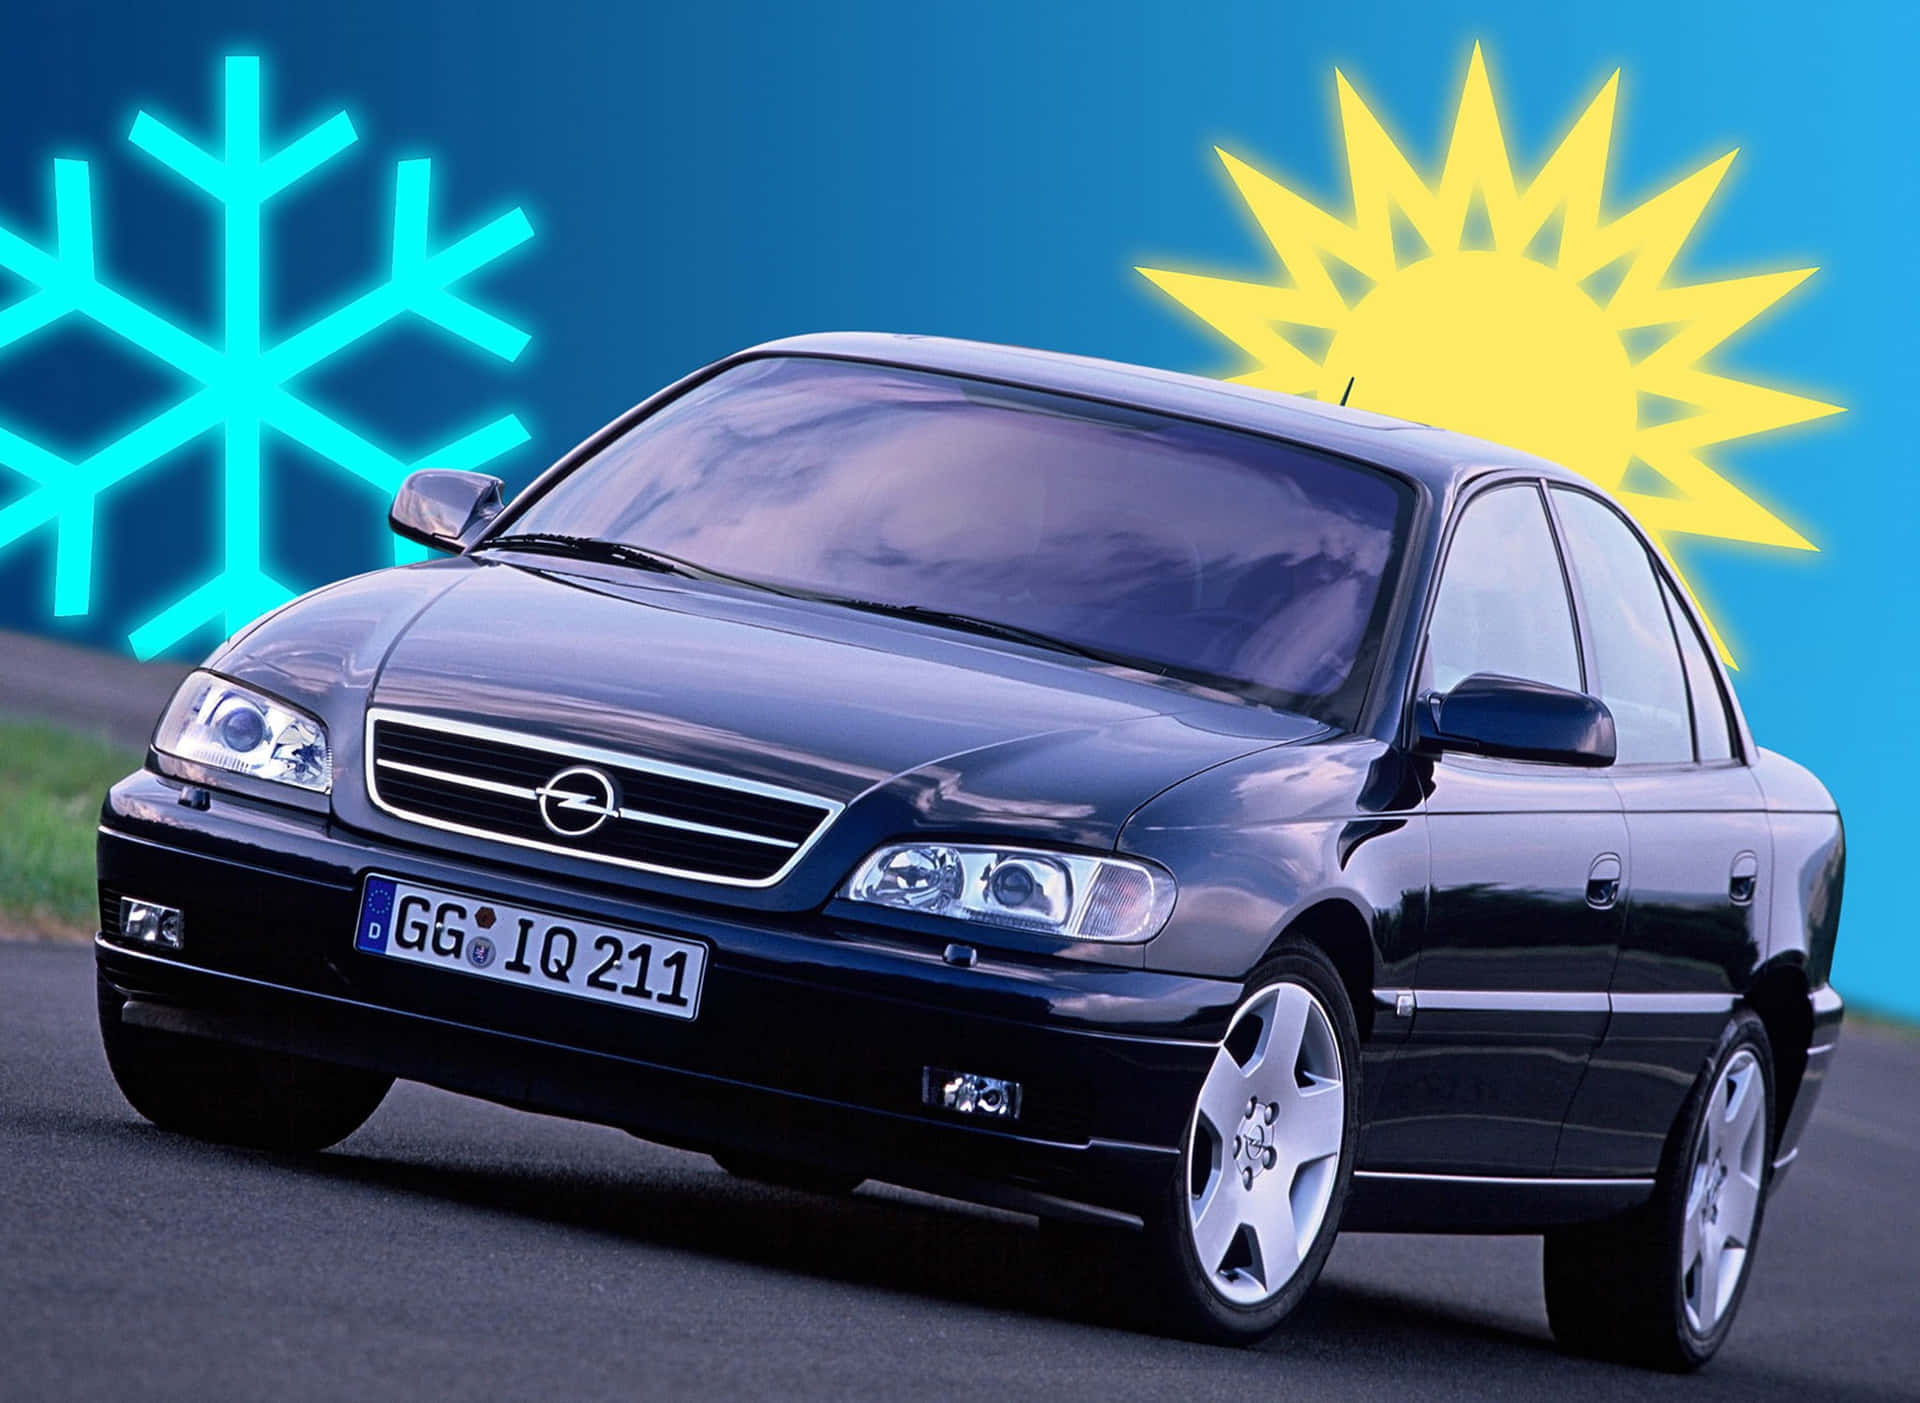 Caption: Opel Omega Ultimate Driving Machine In Nature Wallpaper